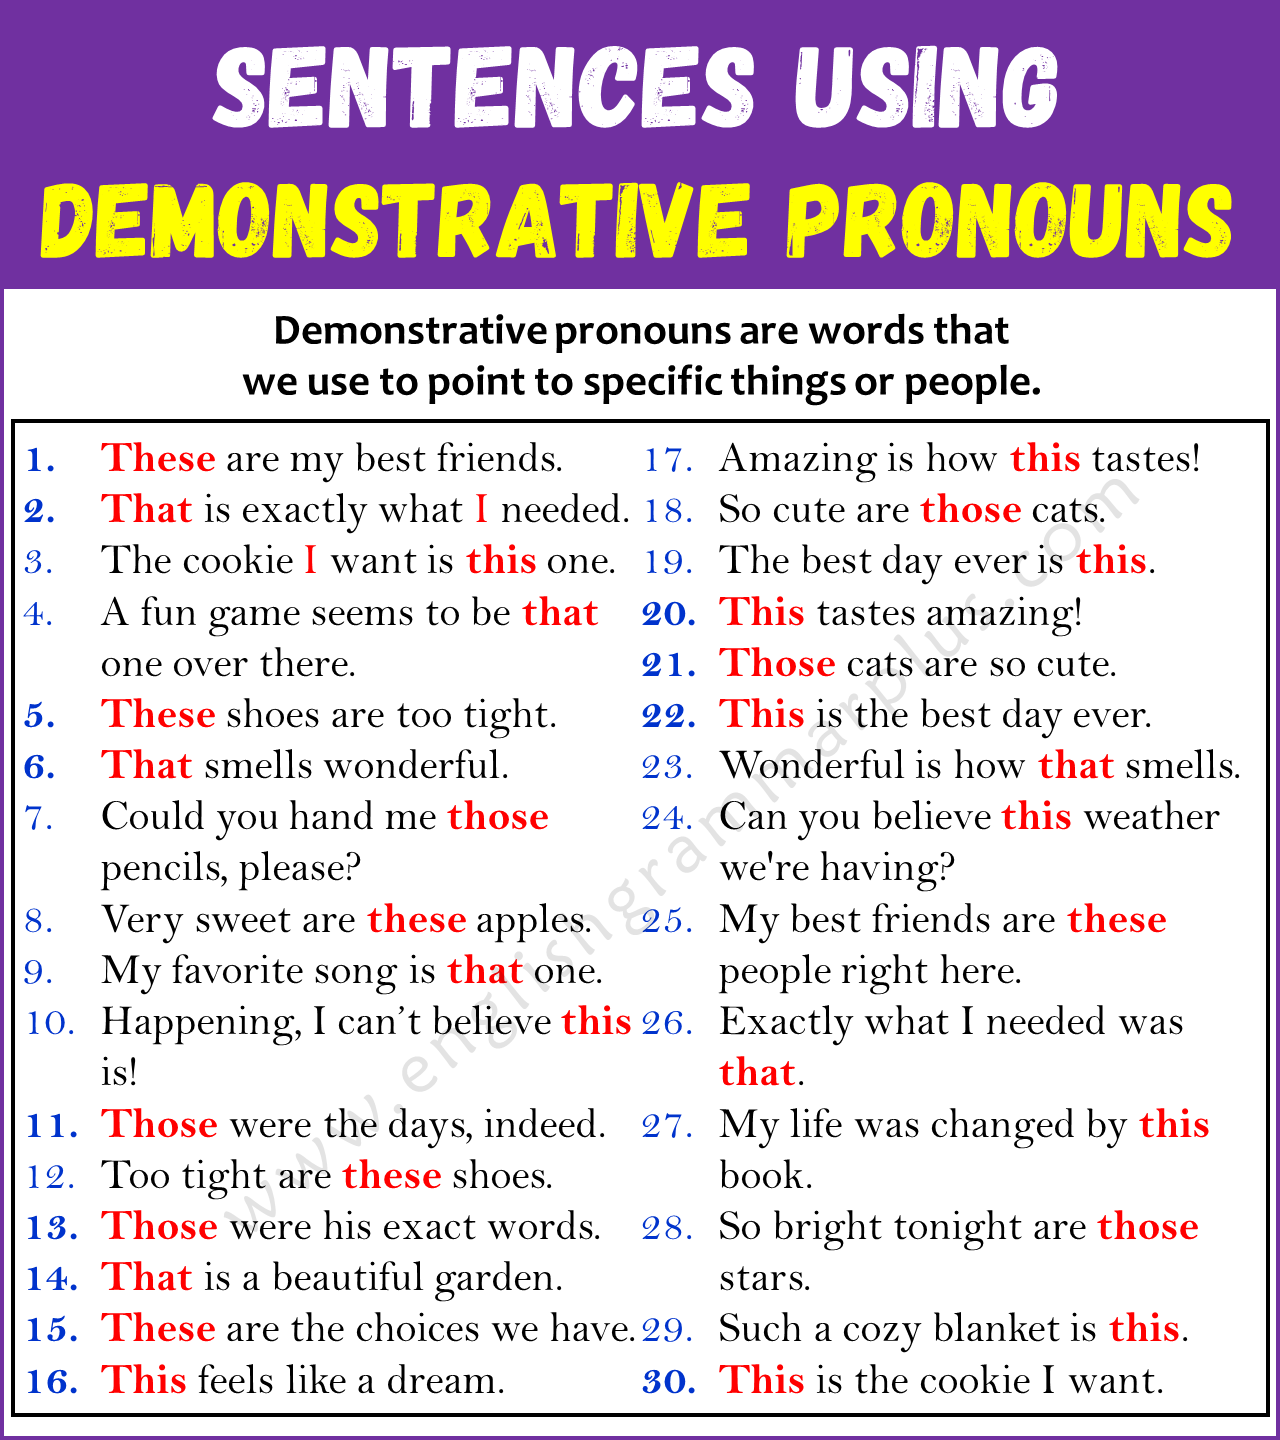 Examples of Demonstrative Pronouns in Sentences